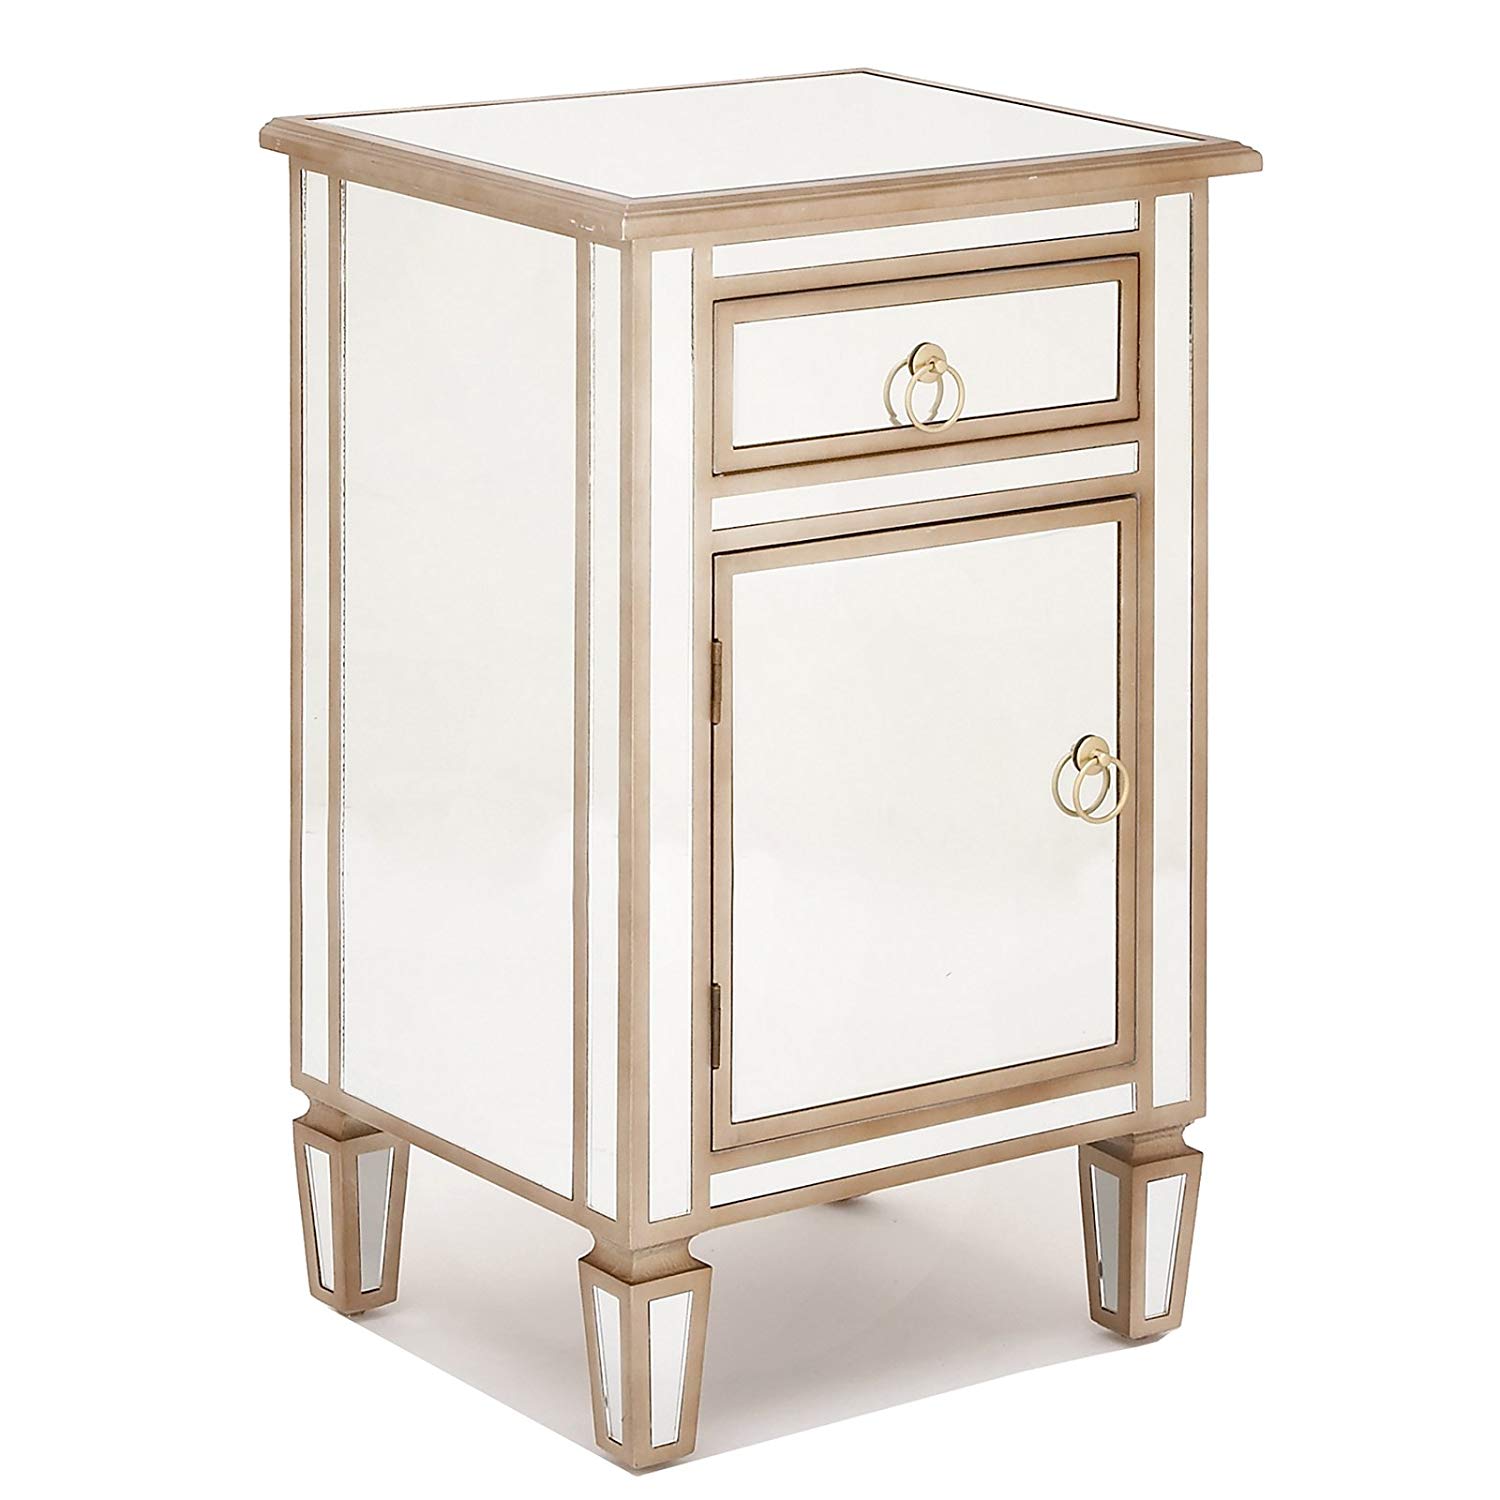 urban designs gold mirrored cabinet side table home accent with drawer kitchen carpet tile edging strip rustic living room end tables inch deep chest drawers ideas pendant